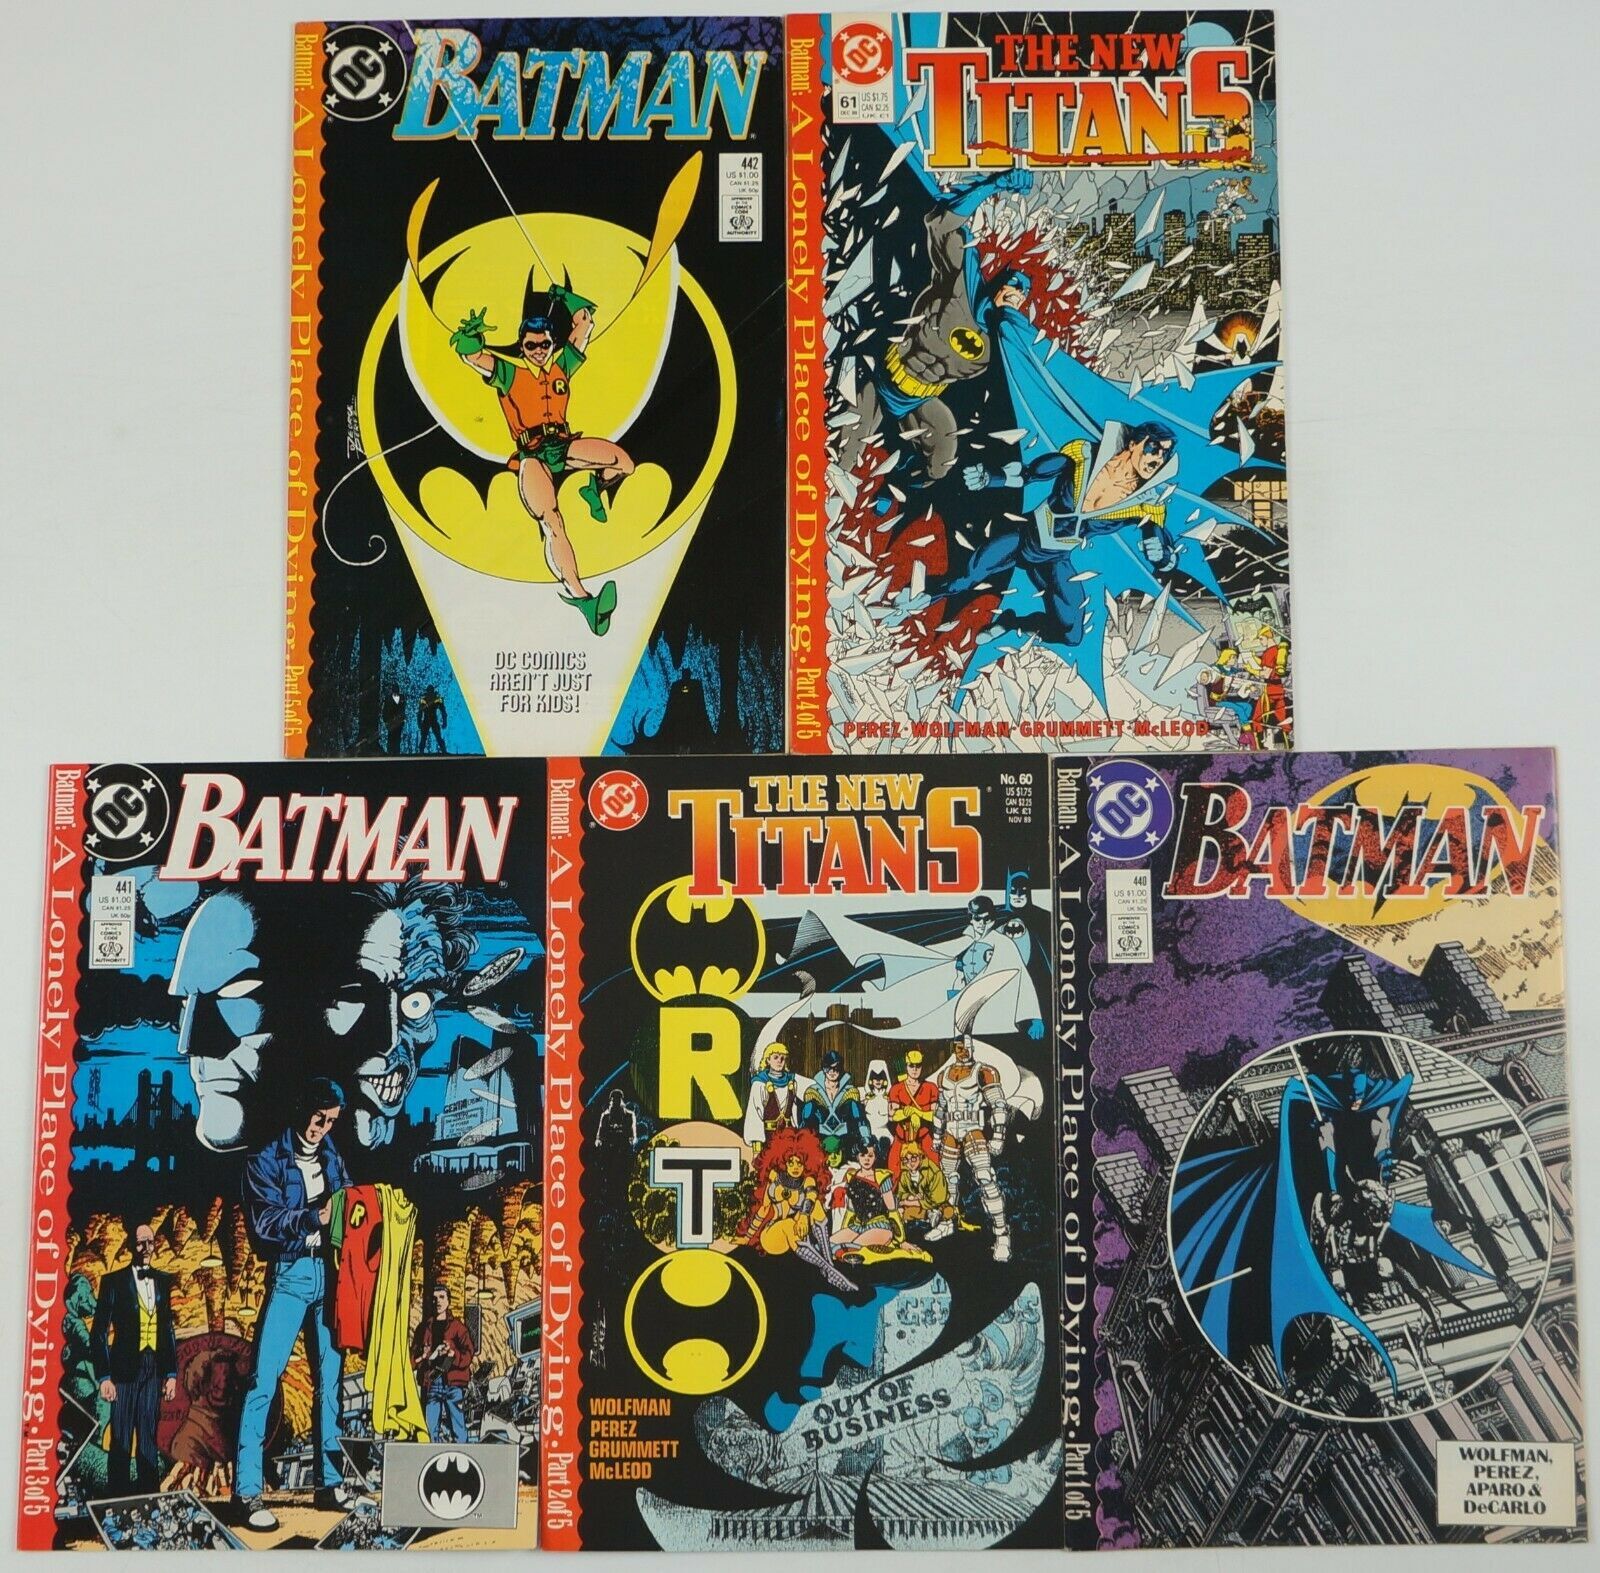 Batman: A Lonely Place of Dying #1-5 FN/VF complete story teen titans -  440-442 | Comic Books - Modern Age, DC Comics, Batman / HipComic